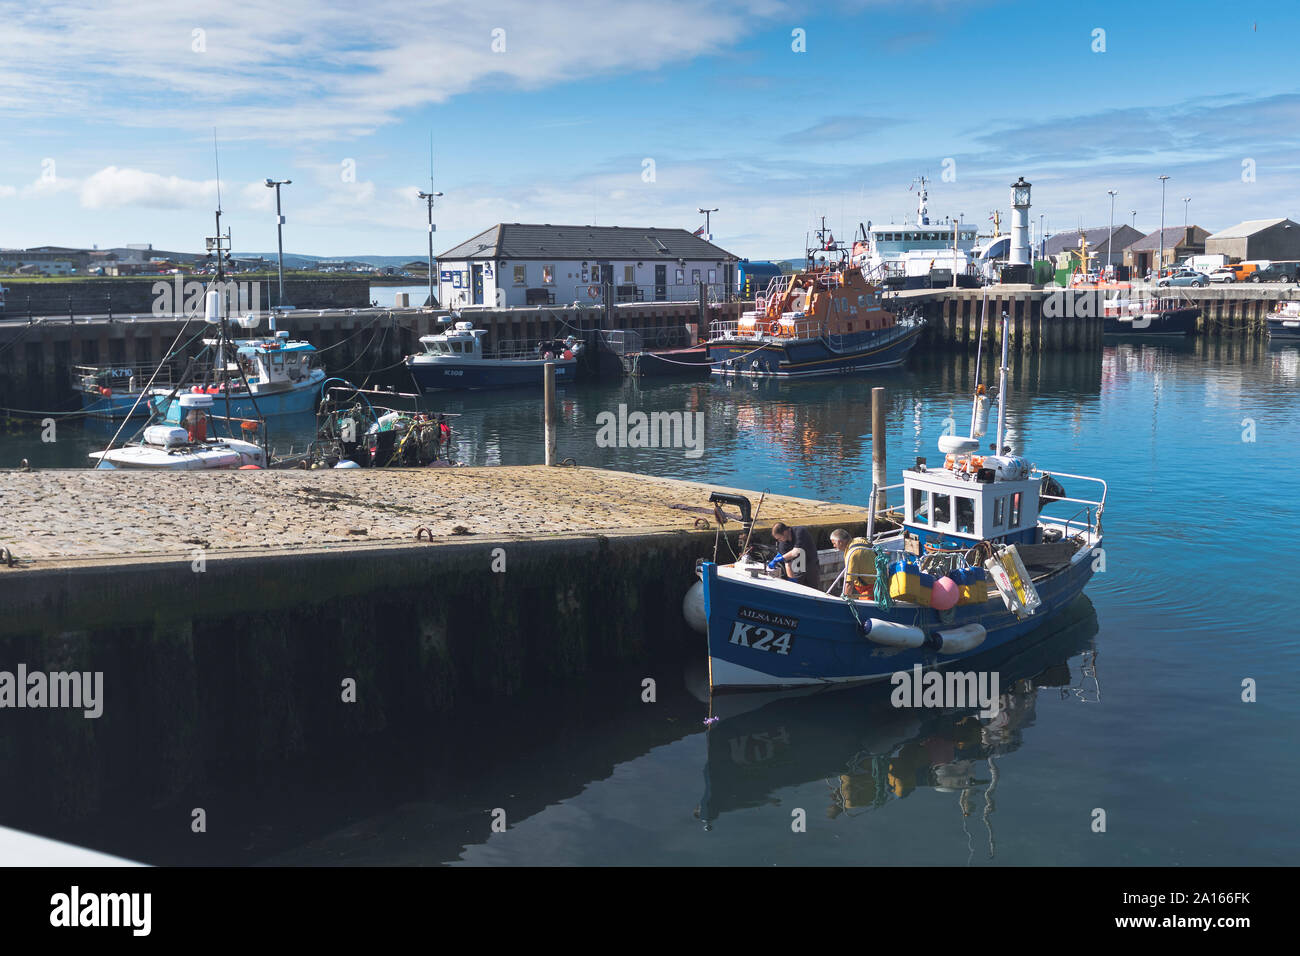 dh Fishermen creel boat KIRKWALL HARBOUR ORKNEY SCOTLAND Working fishing boats Stock Photo